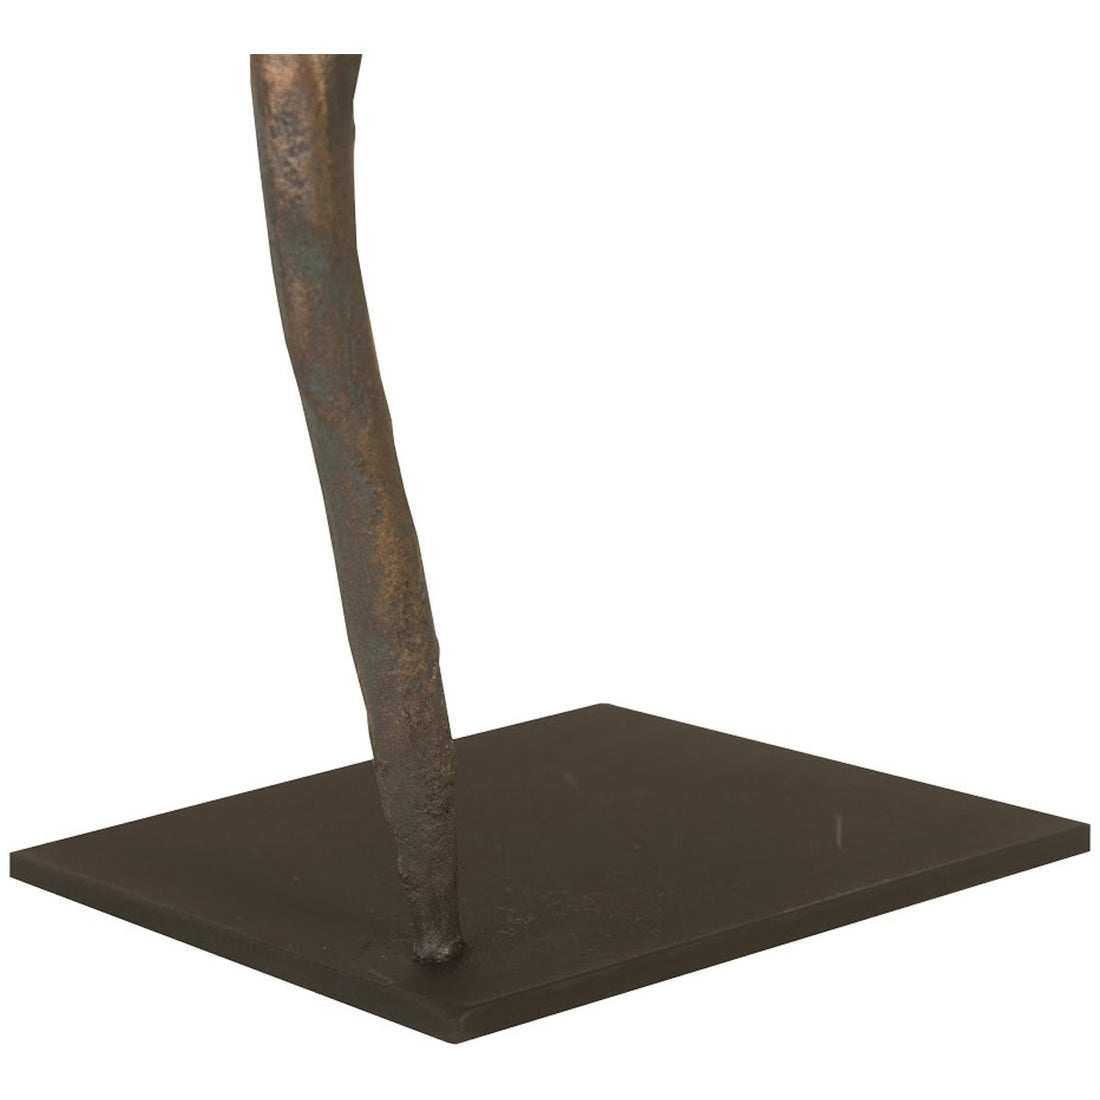 Phillips Collection Abstract Figure Sculpture on Metal Base, Leg Folded